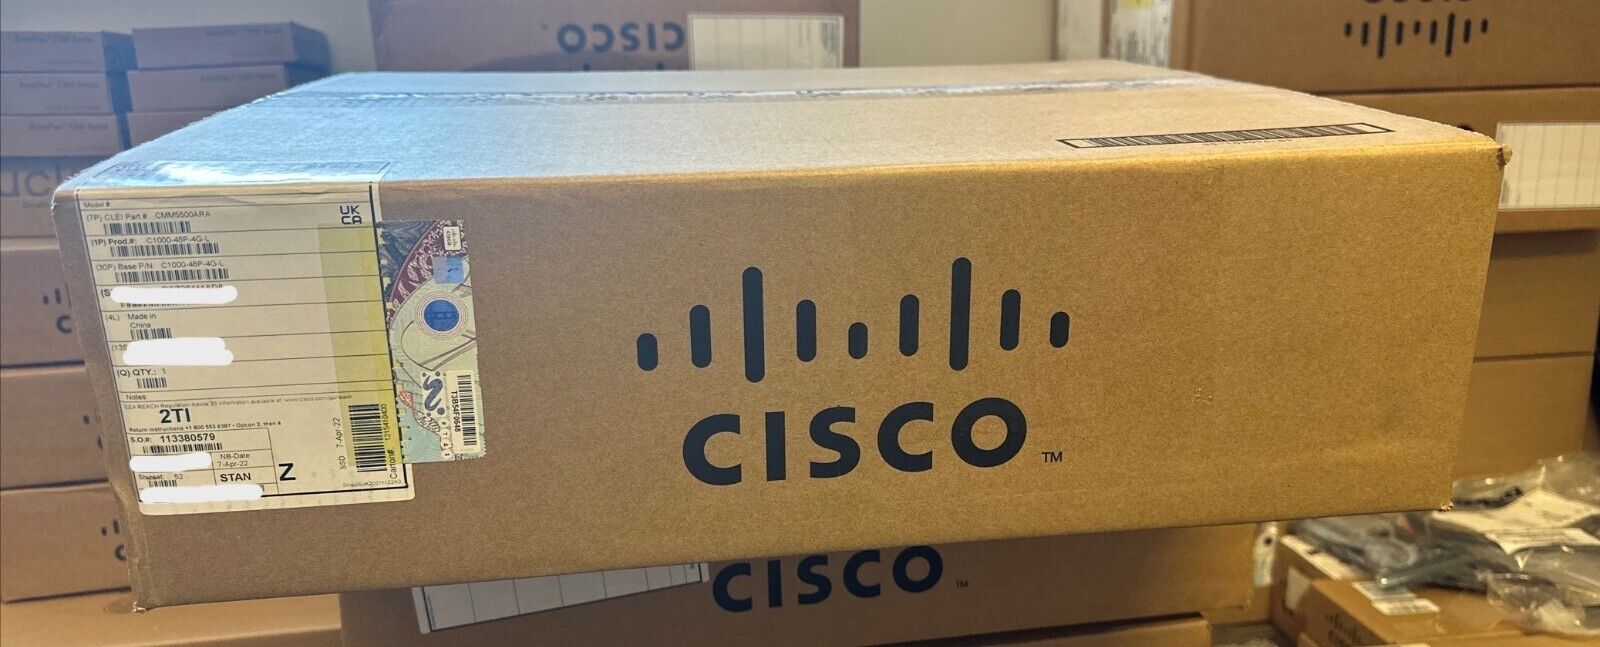 New Sealed Cisco C1000-48P-4G-L 48 Ports PoE Catalyst Network Switch